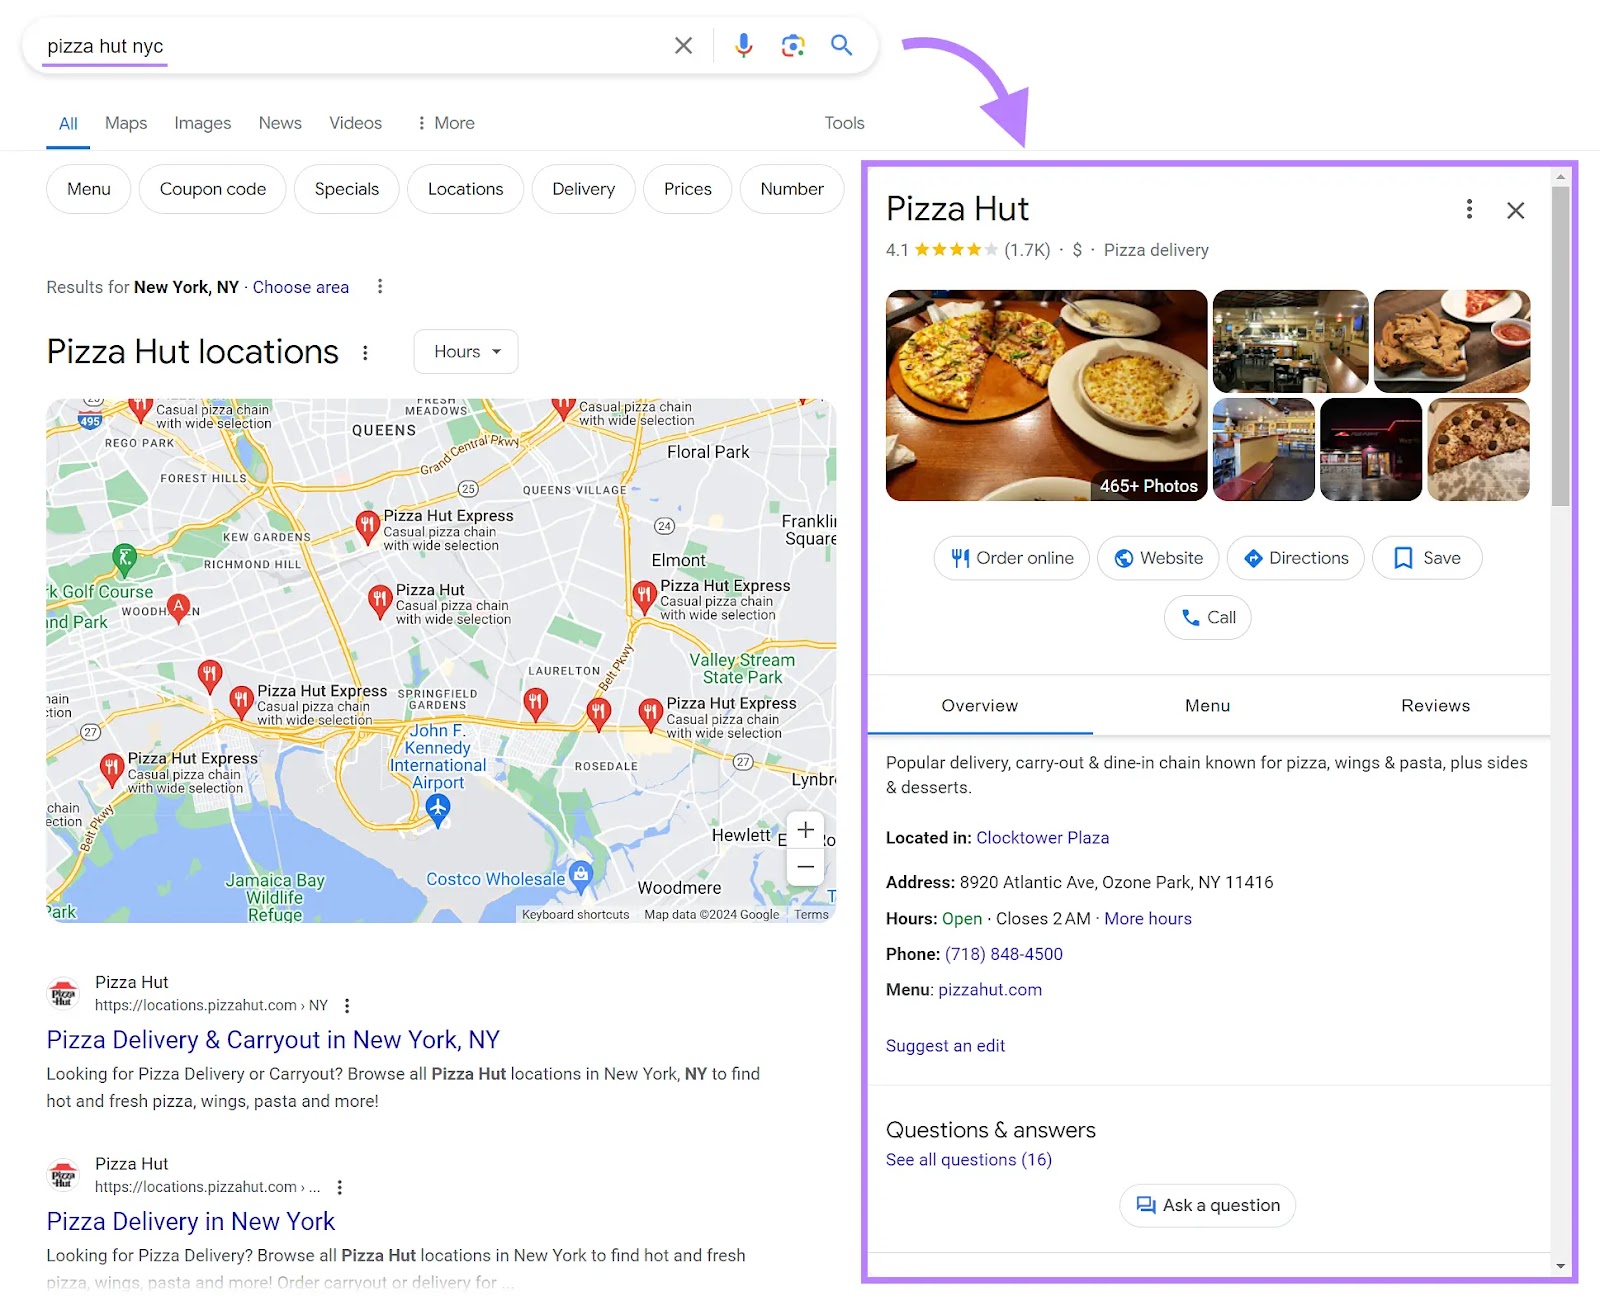 Google Business Profile of "Pizza Hut" displayed within the Google SERP.